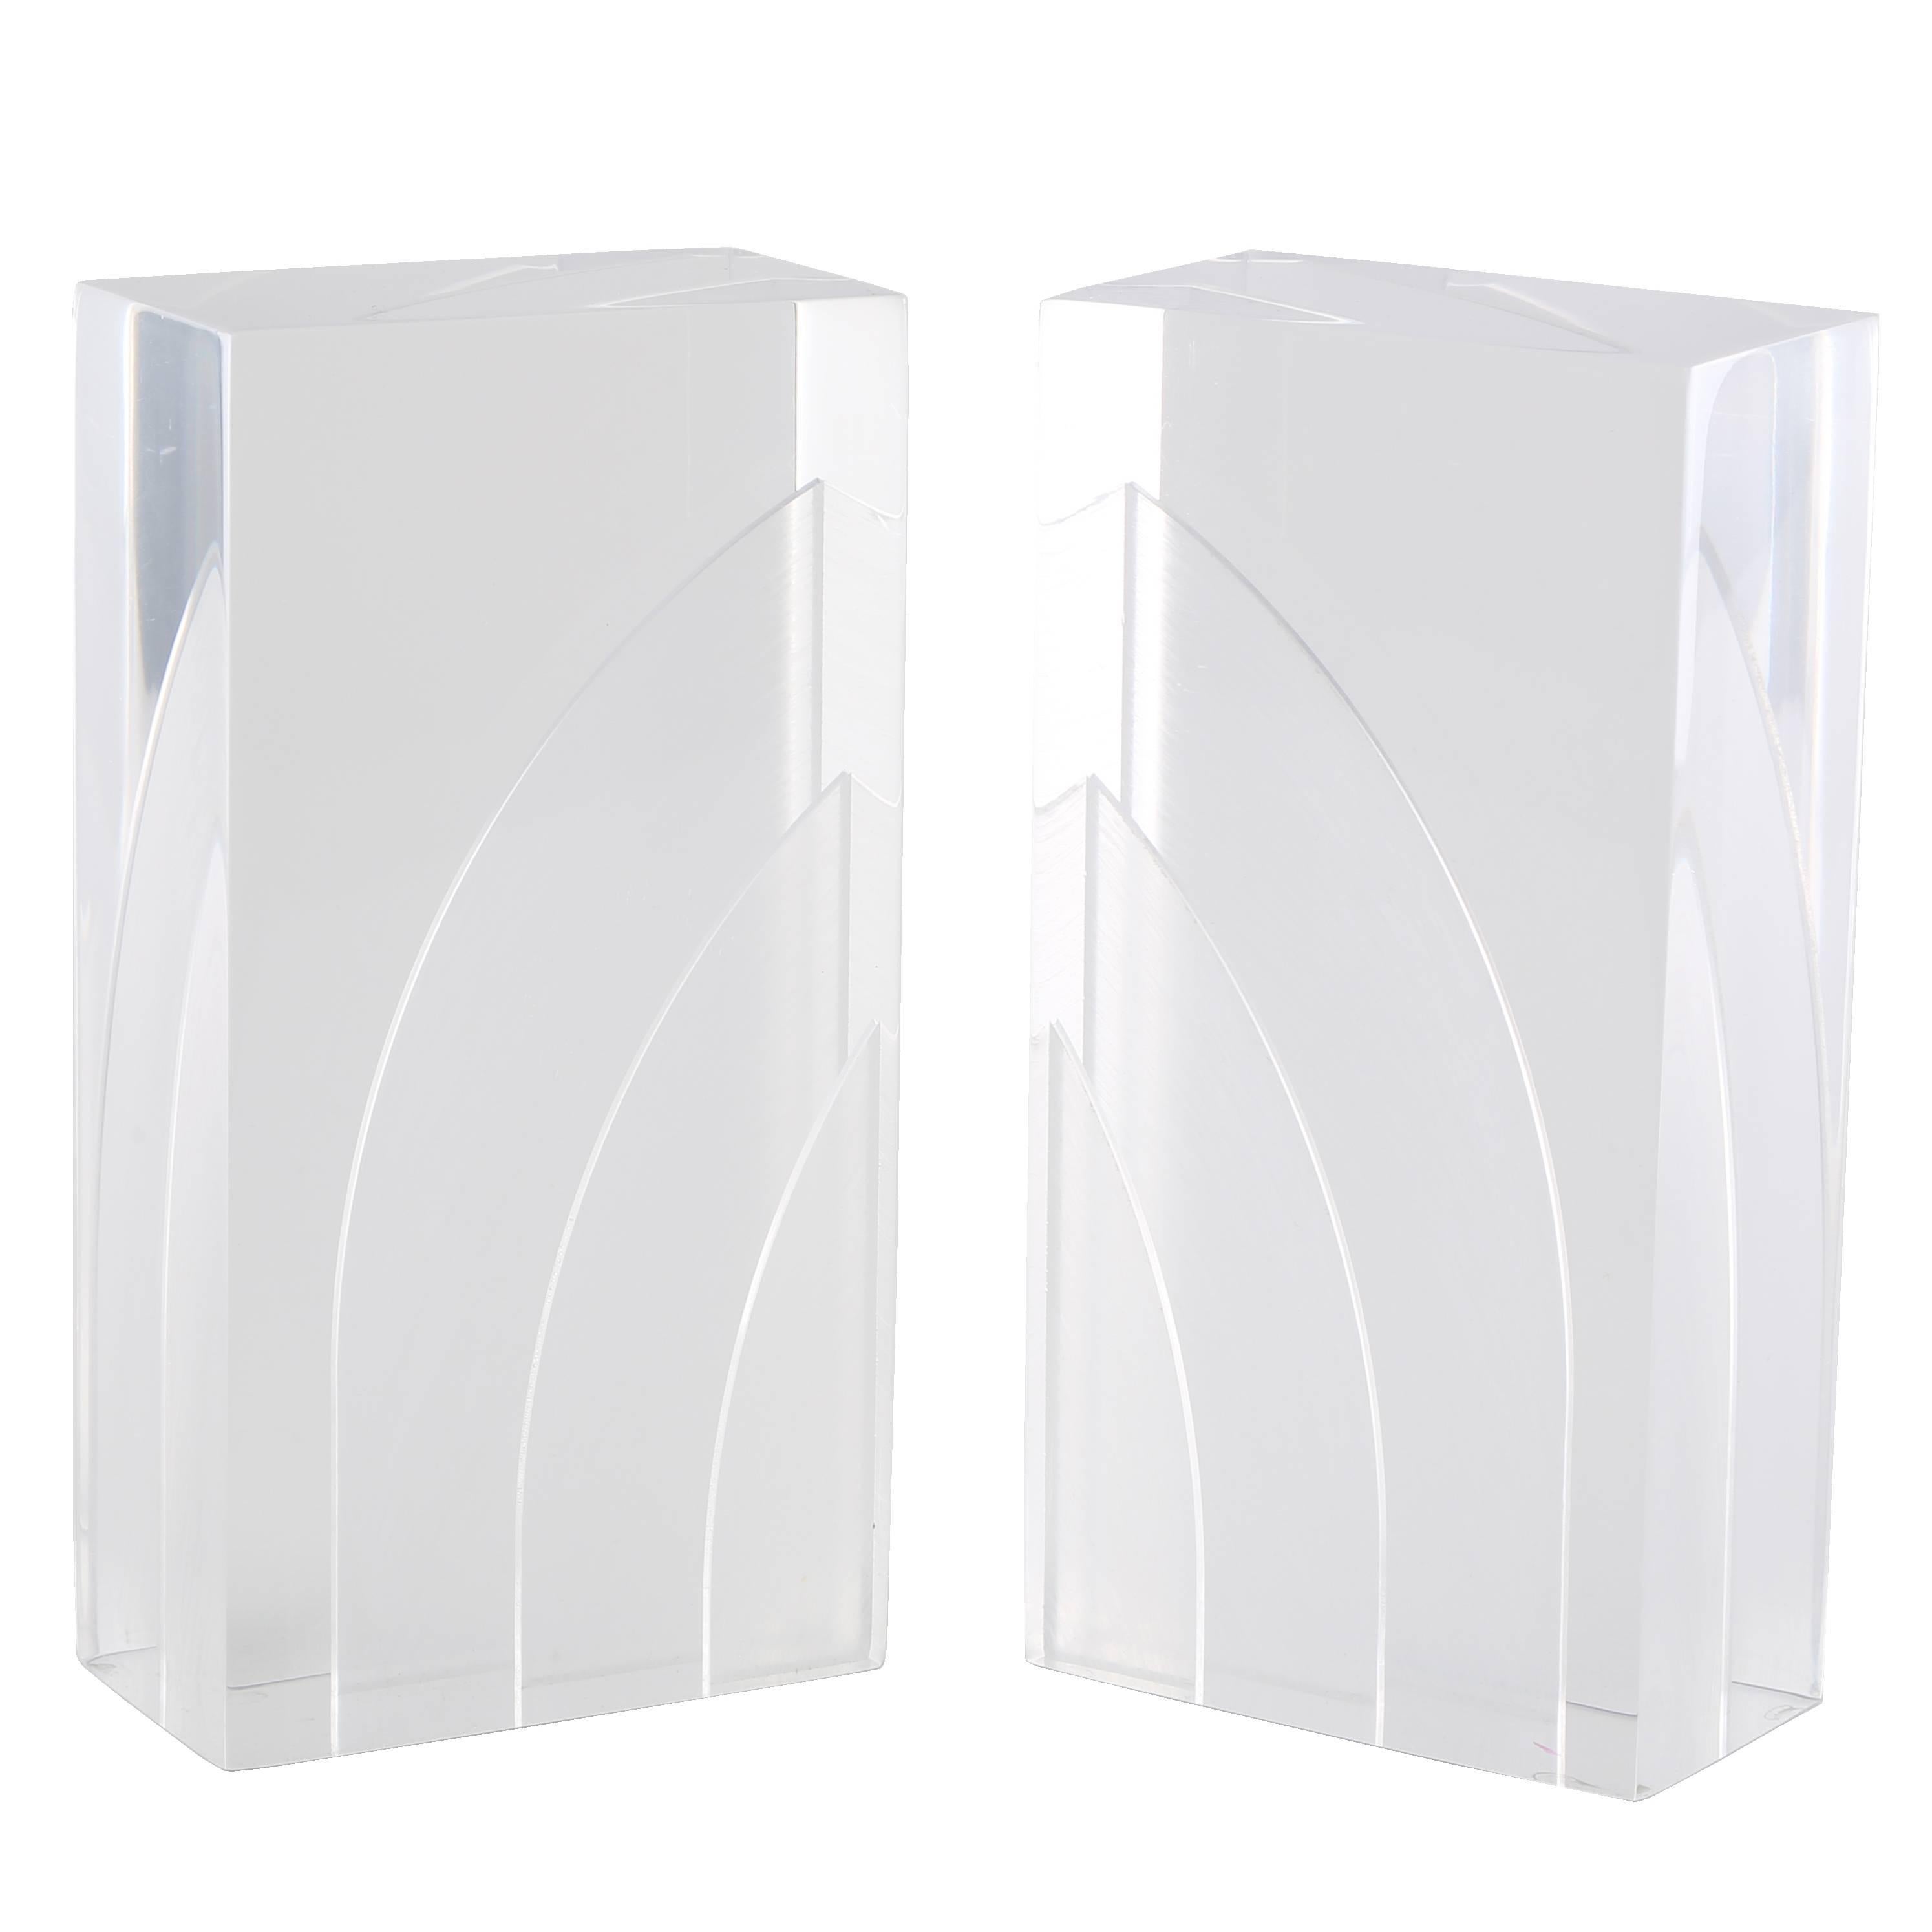 Pair of Thick Lucite Bookends with Internal Sawed Designs